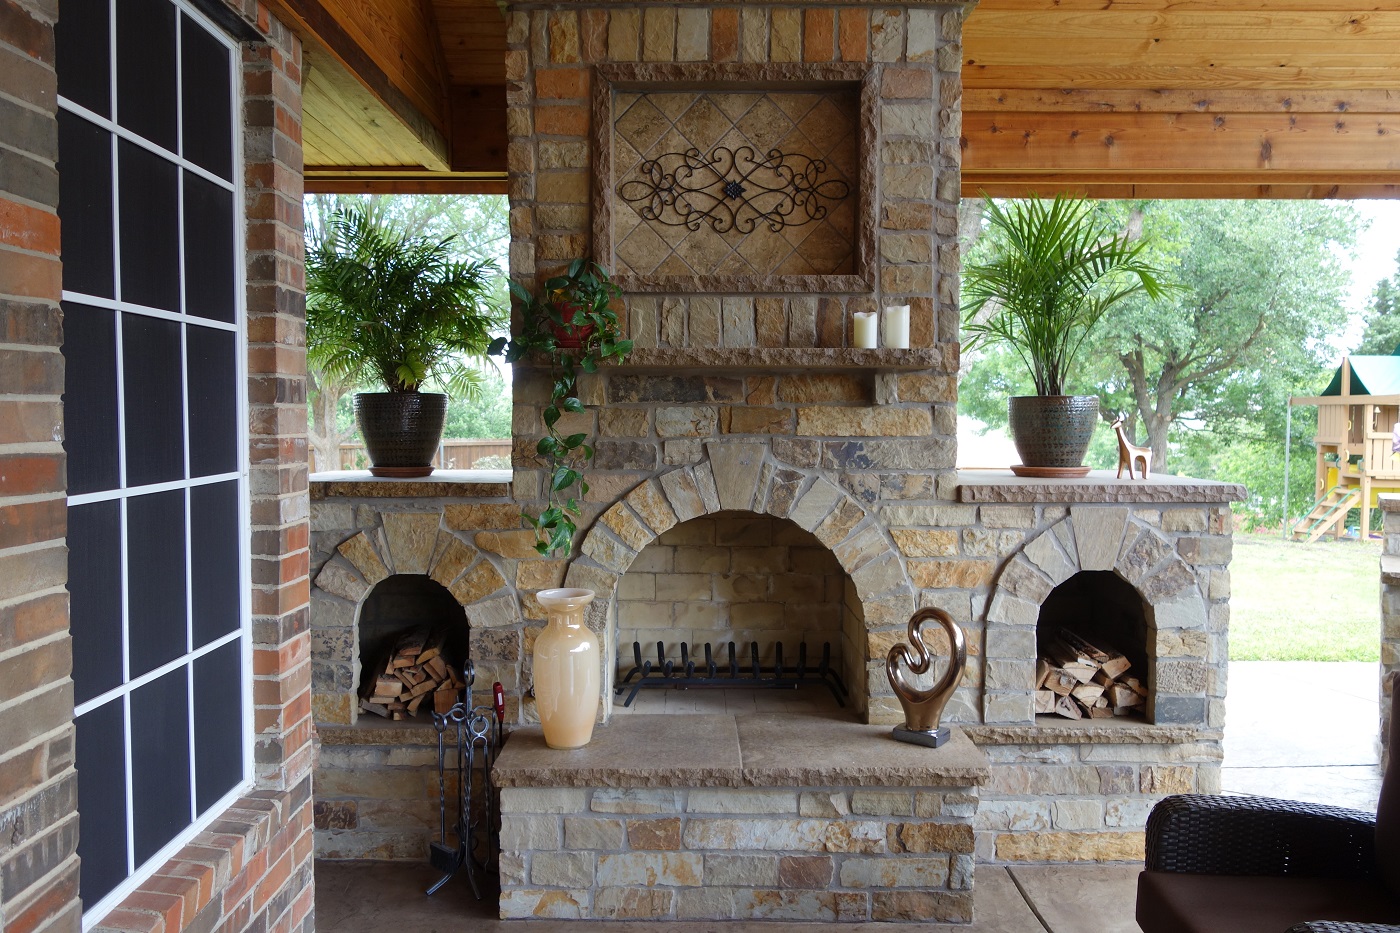 Design Options For Your New Outdoor Fireplace.